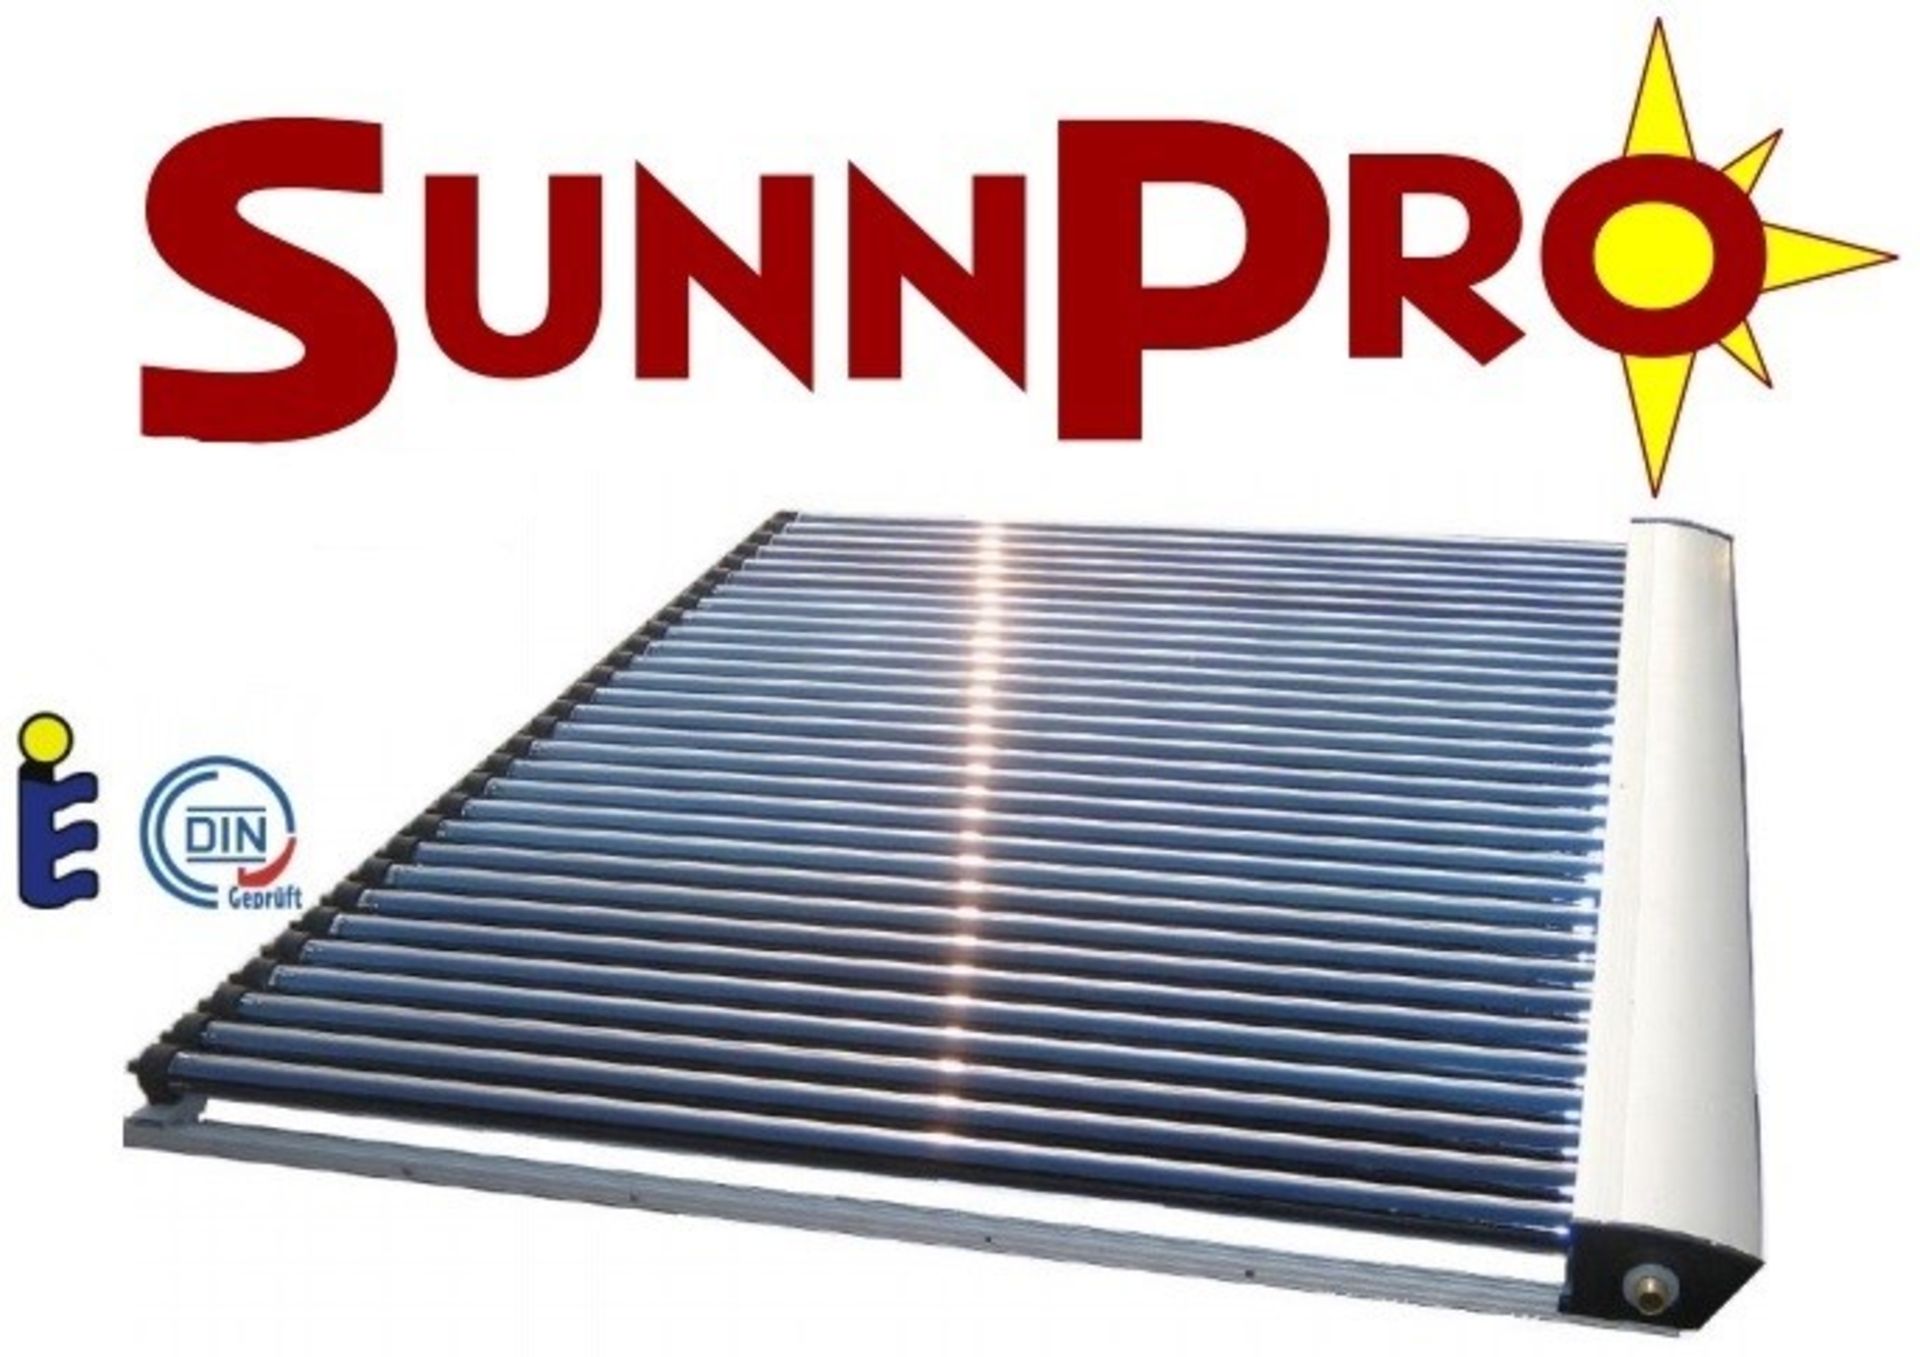 1 x Sunnpro SP30 Vacuum Tube Solar Panel SPARE TUBE PACK - Size 2420 x 2010mm - Amongst The Most